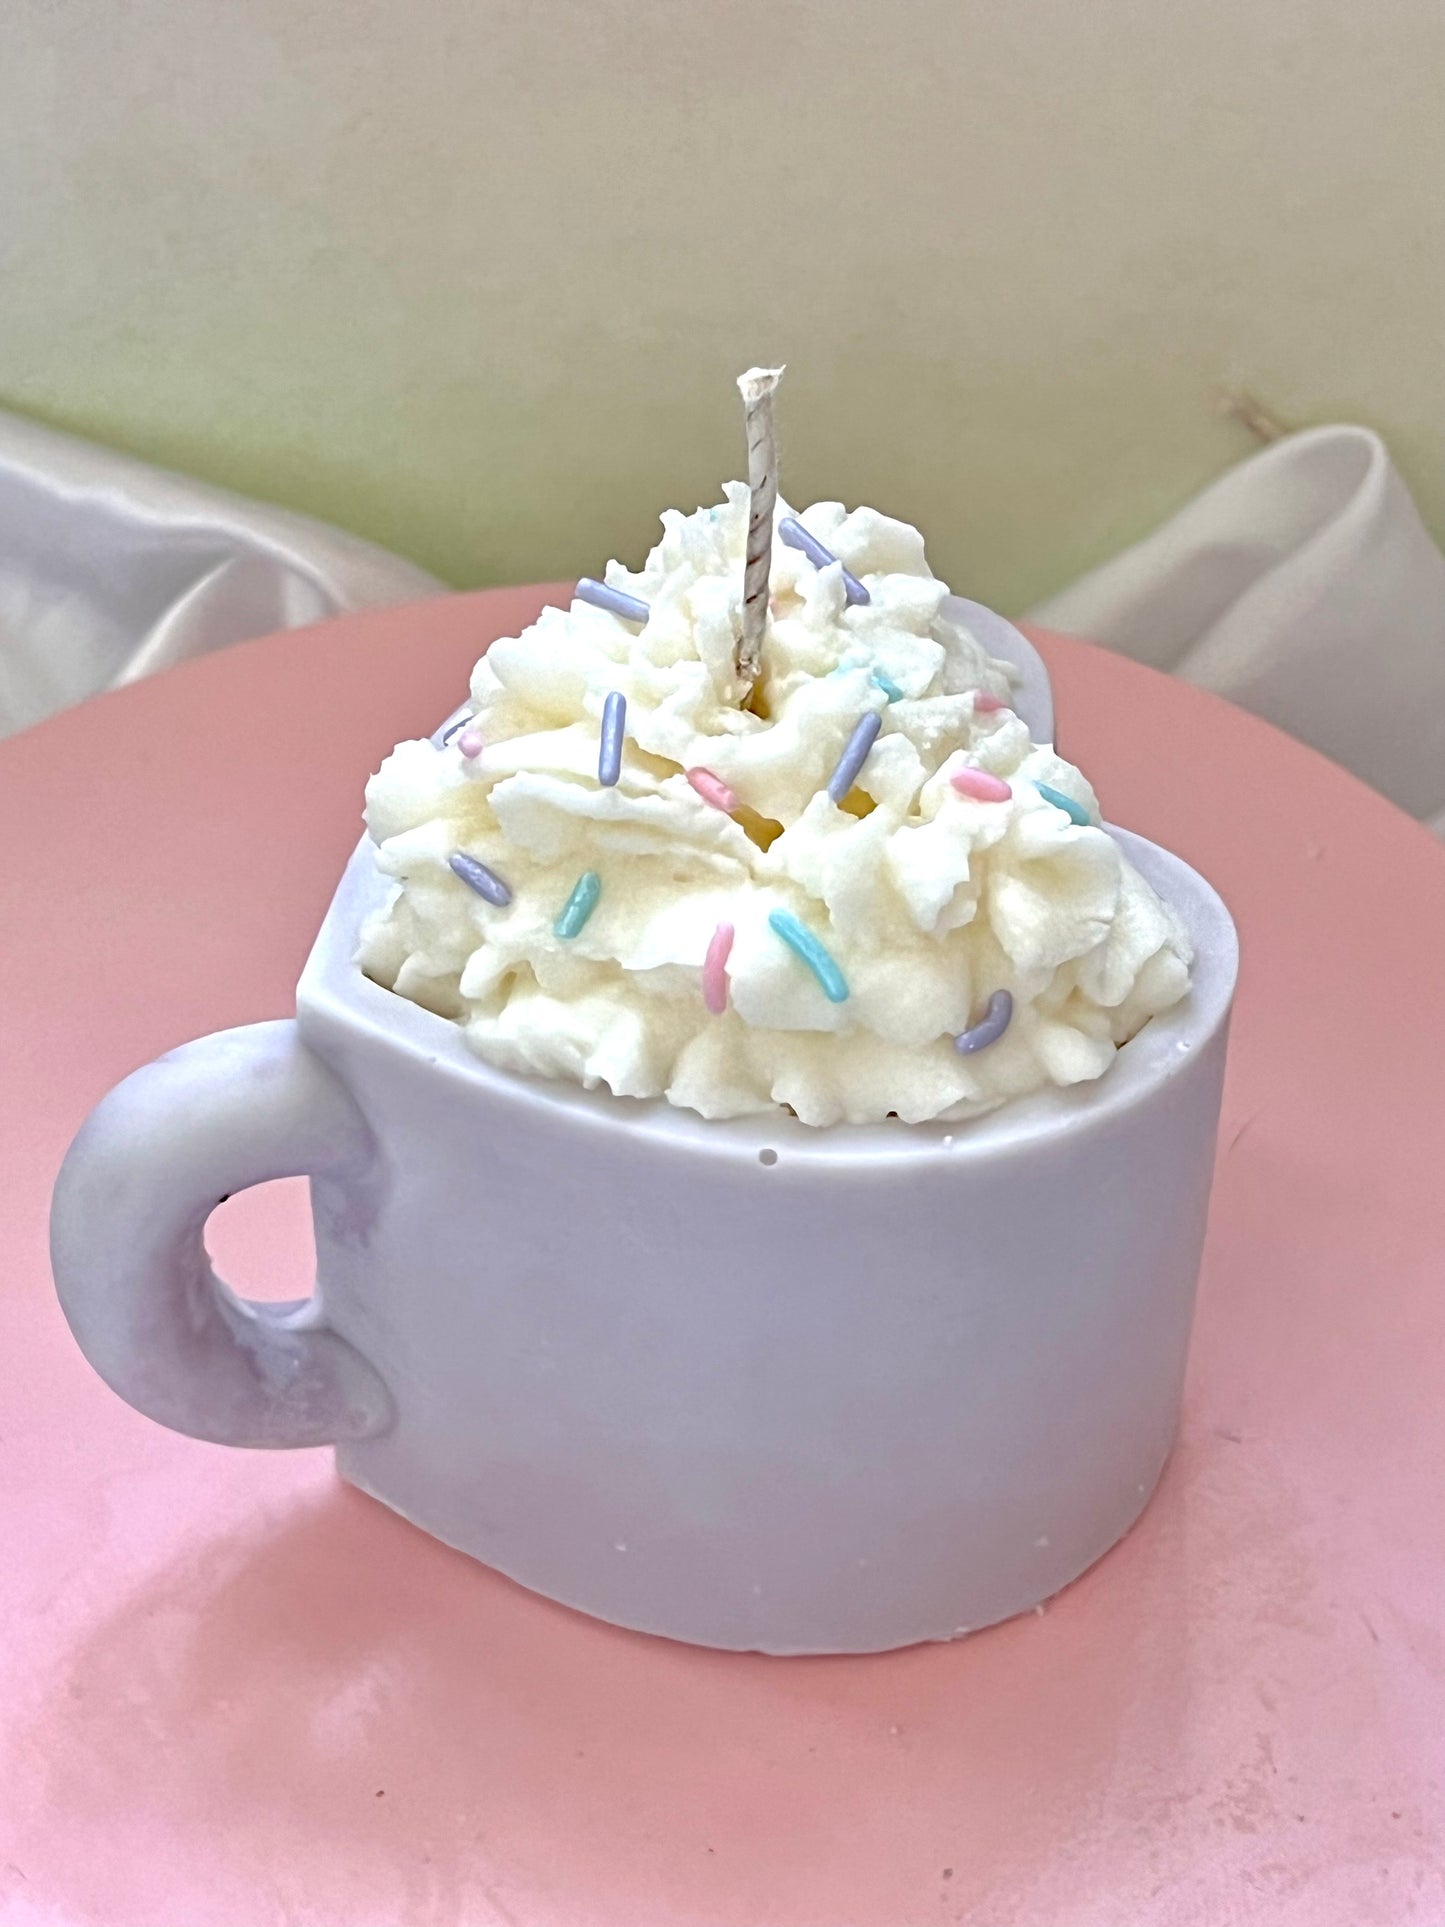 Heart Latte Candle with "Whipped Cream" & Sprinkles